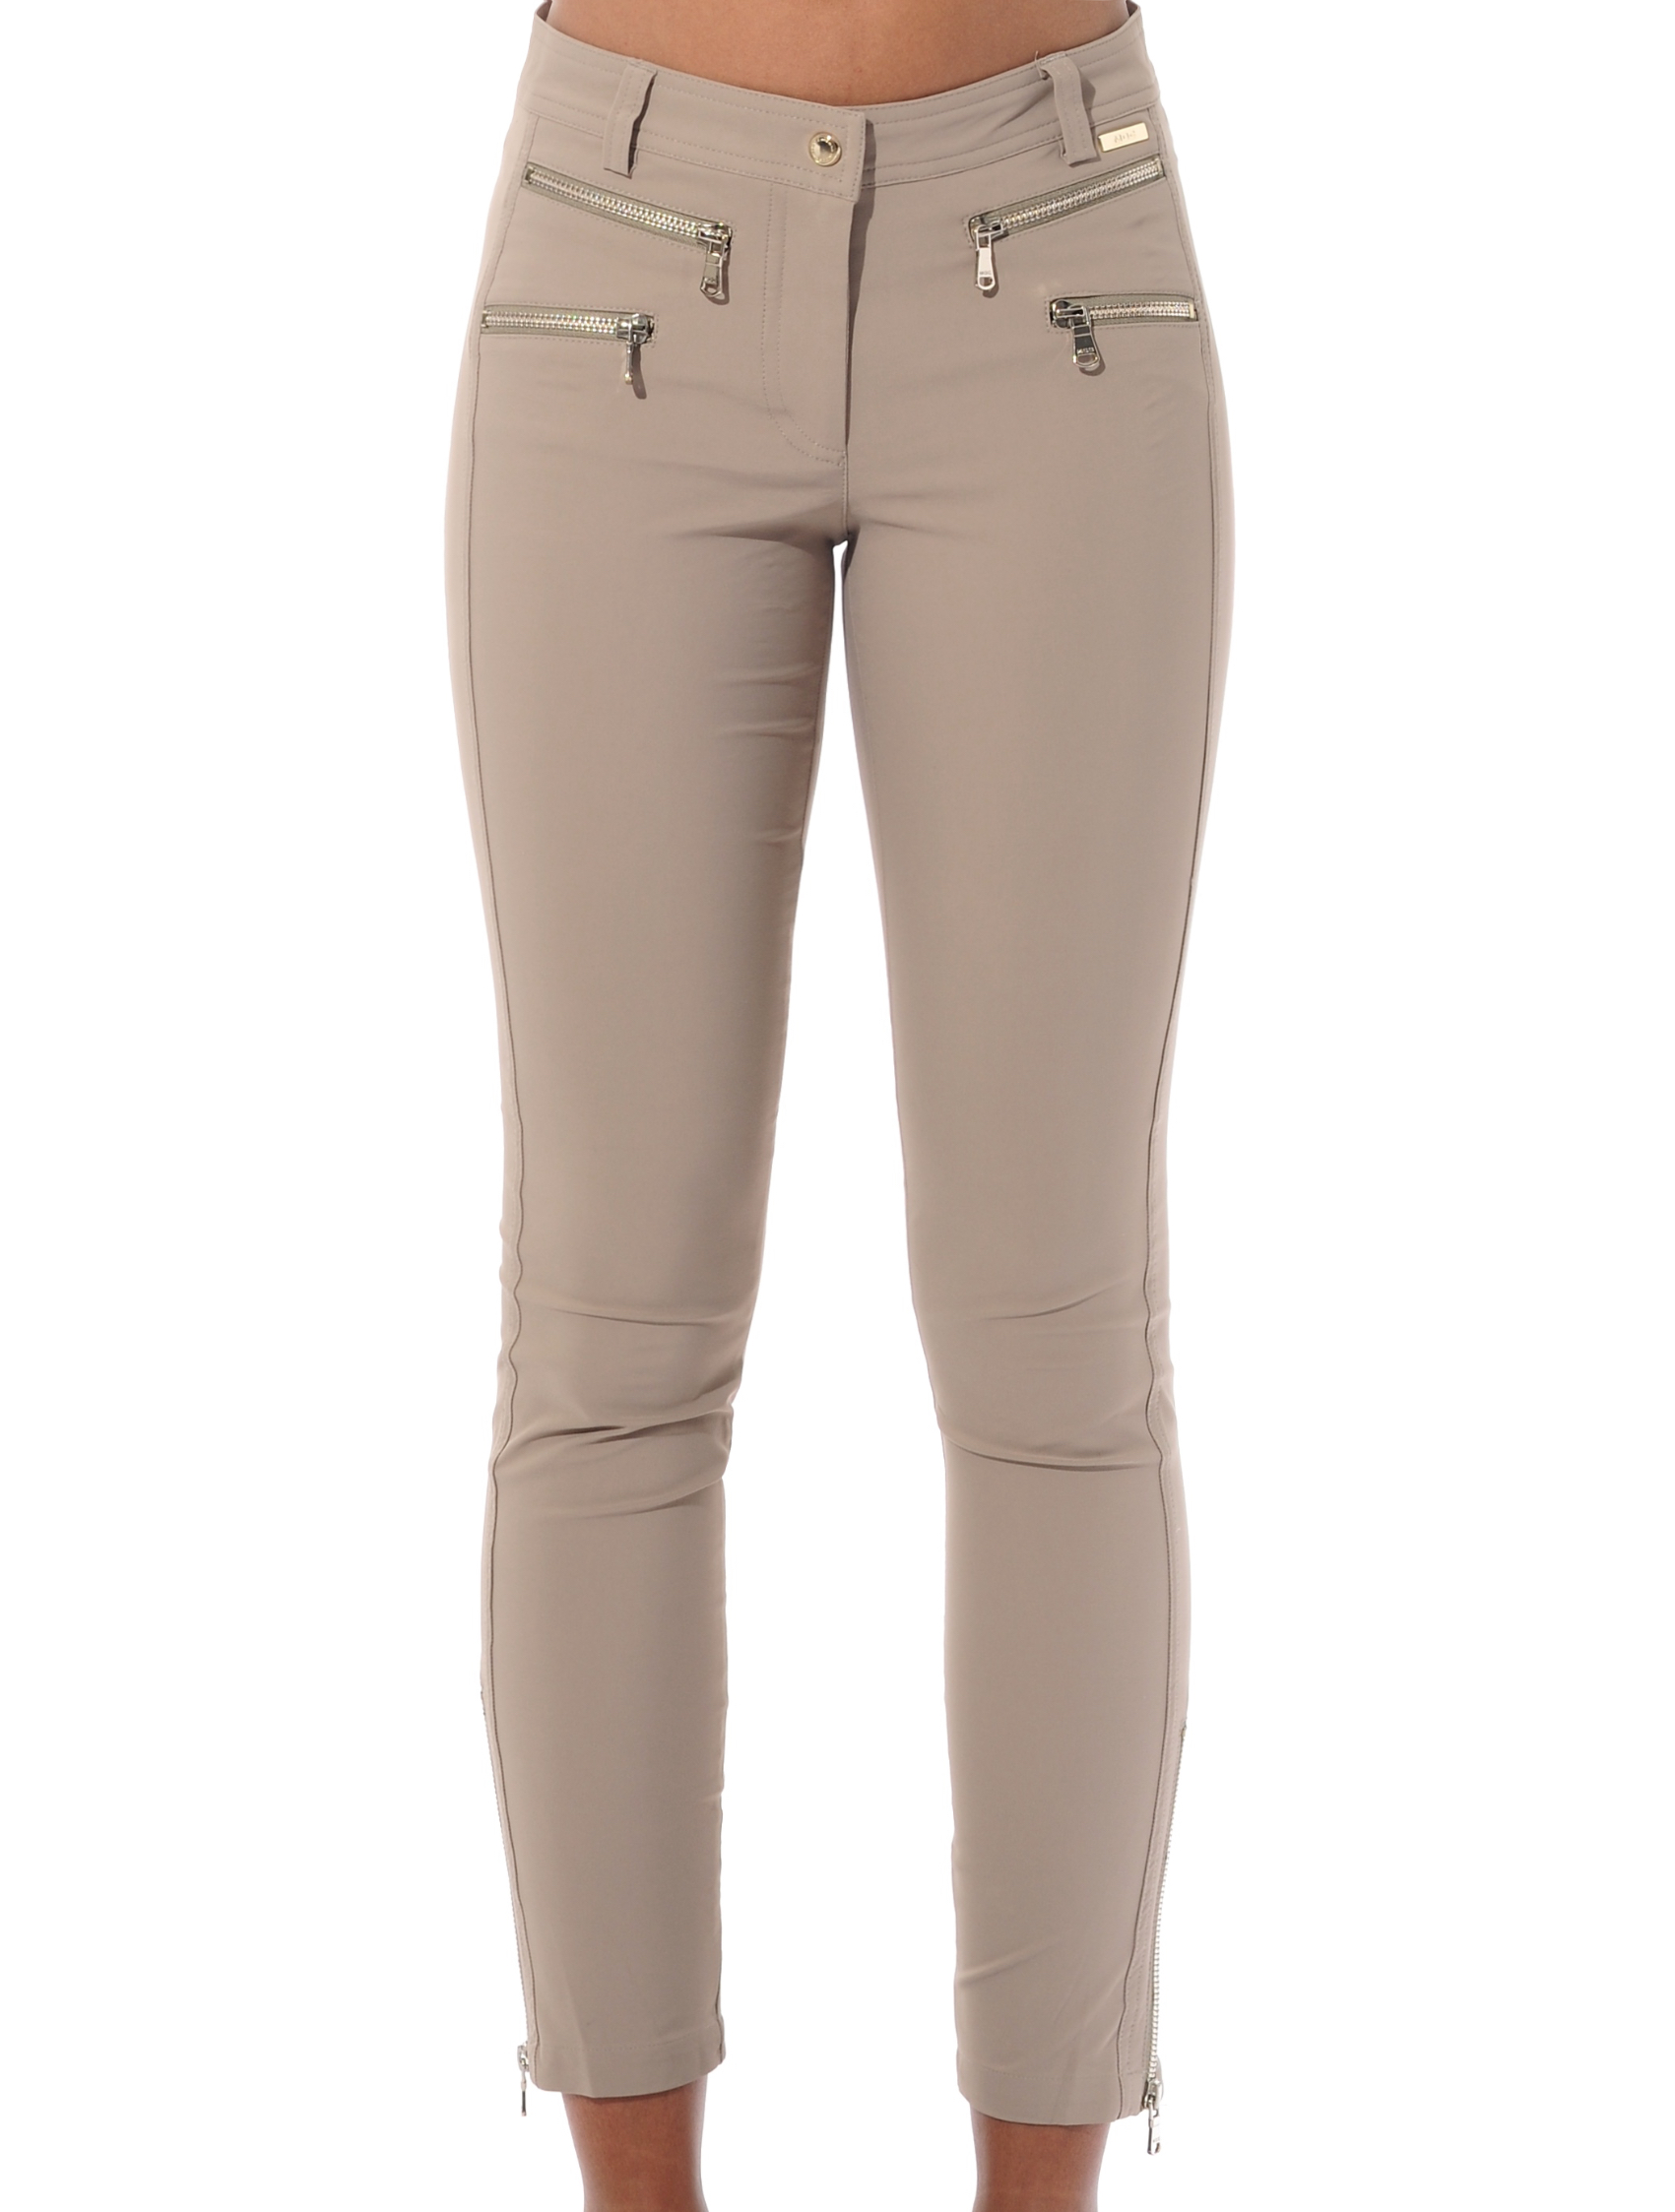 4way stretch double zip ankle pants taupe 